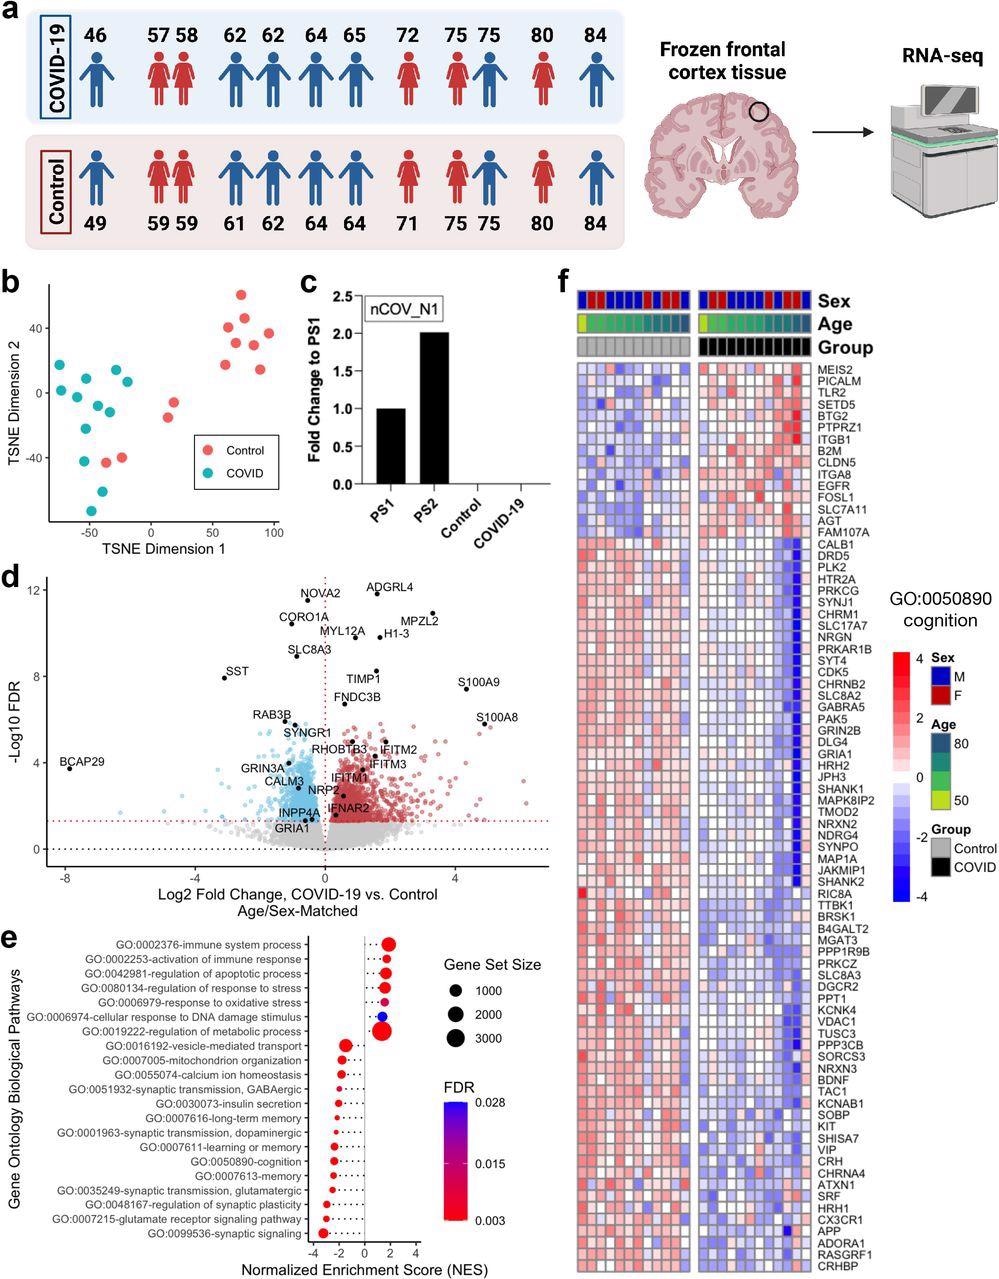 Severe COVID-19 induces global transcriptomic changes in the frontal cortex of the brain. a. Left, age and sex of each individual in COVID-19 or control groups (n=12/group) analyzed in this cohort. Each COVID-19 case was matched with an uninfected control case by sex and age (±2 years). Right, schematic of study approach. Schematic was generated with BioRender. b. t-distributed stochastic neighbor embedding (TSNE) analysis of frontal cortex transcriptomes from COVID-19 cases and uninfected controls. c. qPCR assessment of SARS-CoV-2 viral RNA in the frontal cortex using the nCOV_N1 primer set. PS1 and PS2 correspond to the 2019-nCoV_N_Positive Control RUO Plasmid (IDT) at concentrations of 1,000 and 2,000 copies/μl, respectively (a technical duplicate/concentration was used to estimate the corresponding mean; for control and COVID-19 samples